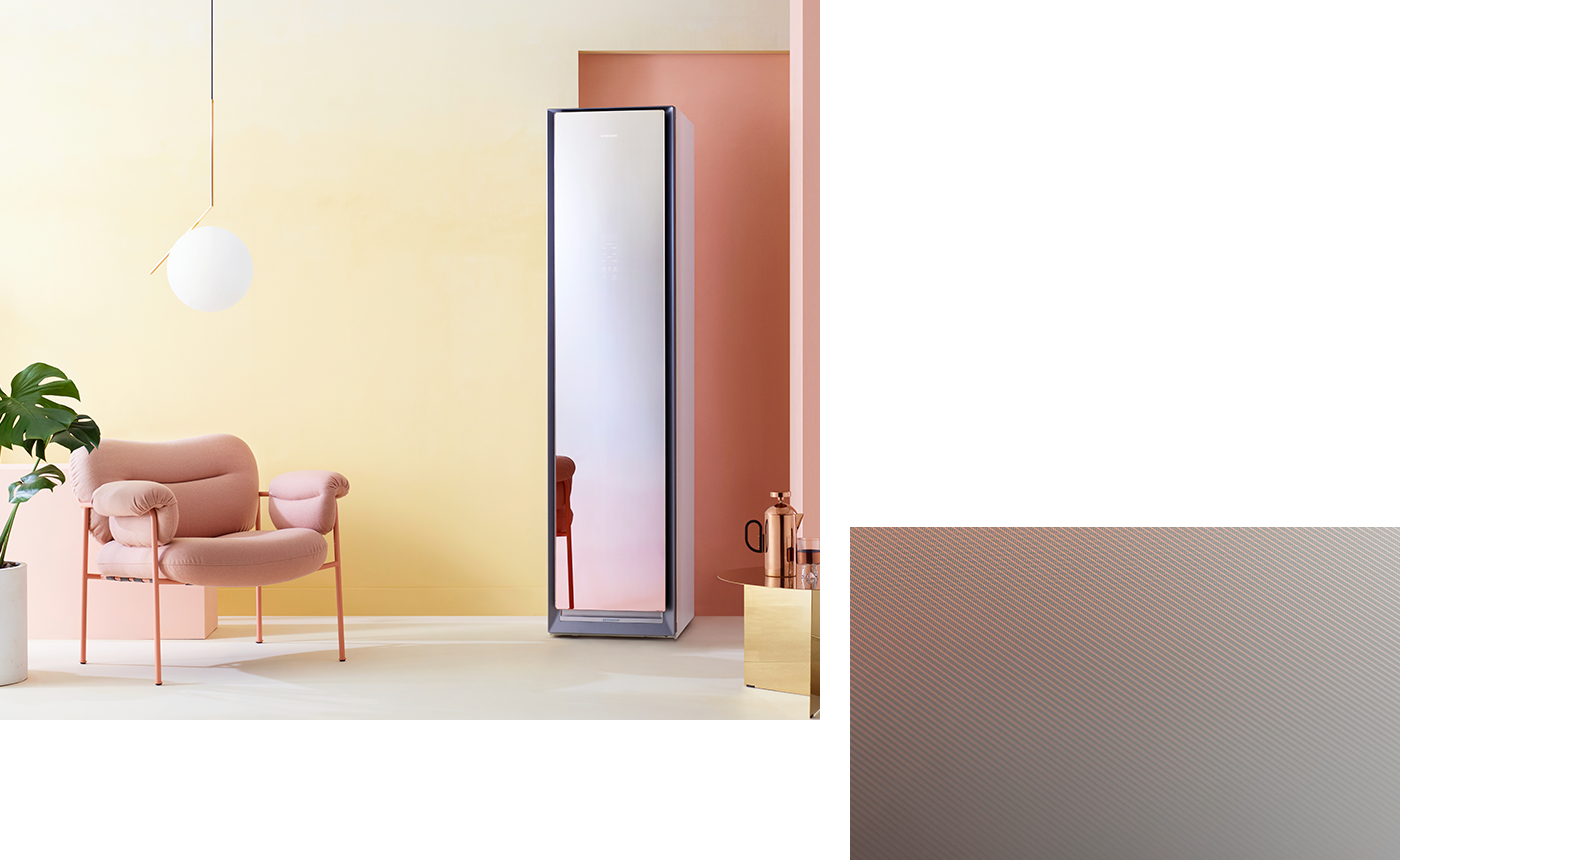 . This is an image of AirDresser Gold Mirror. / A detailed image of the AirDresser gold mirror door.